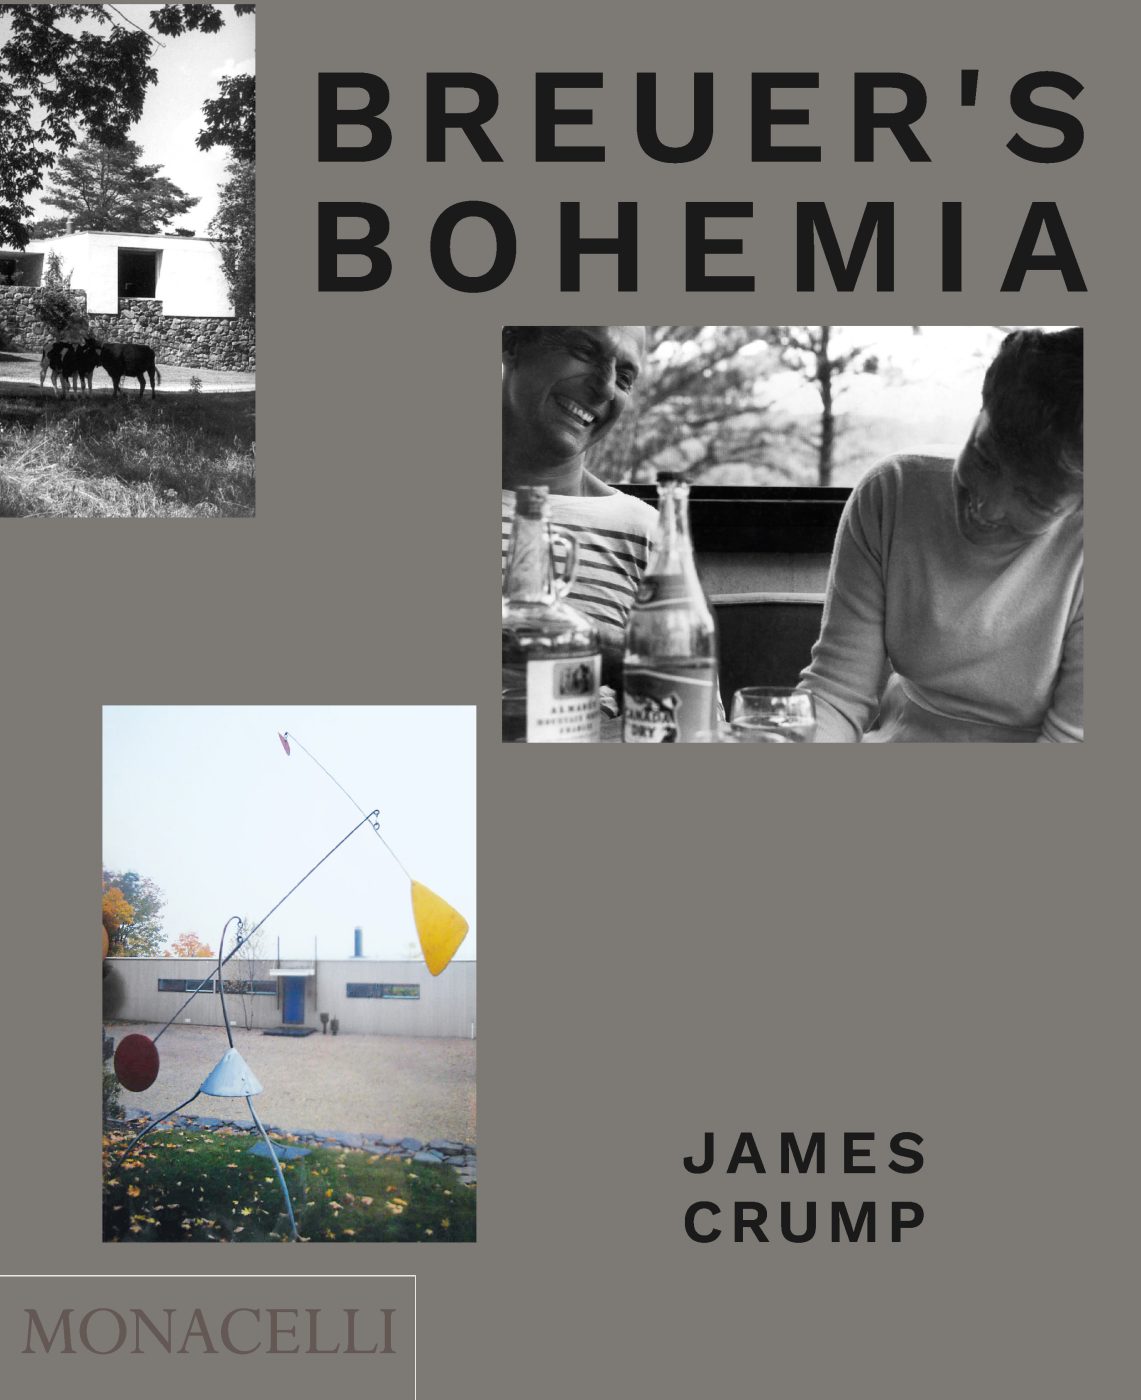 The front cover of Breuer's Bohemia, by James Crump